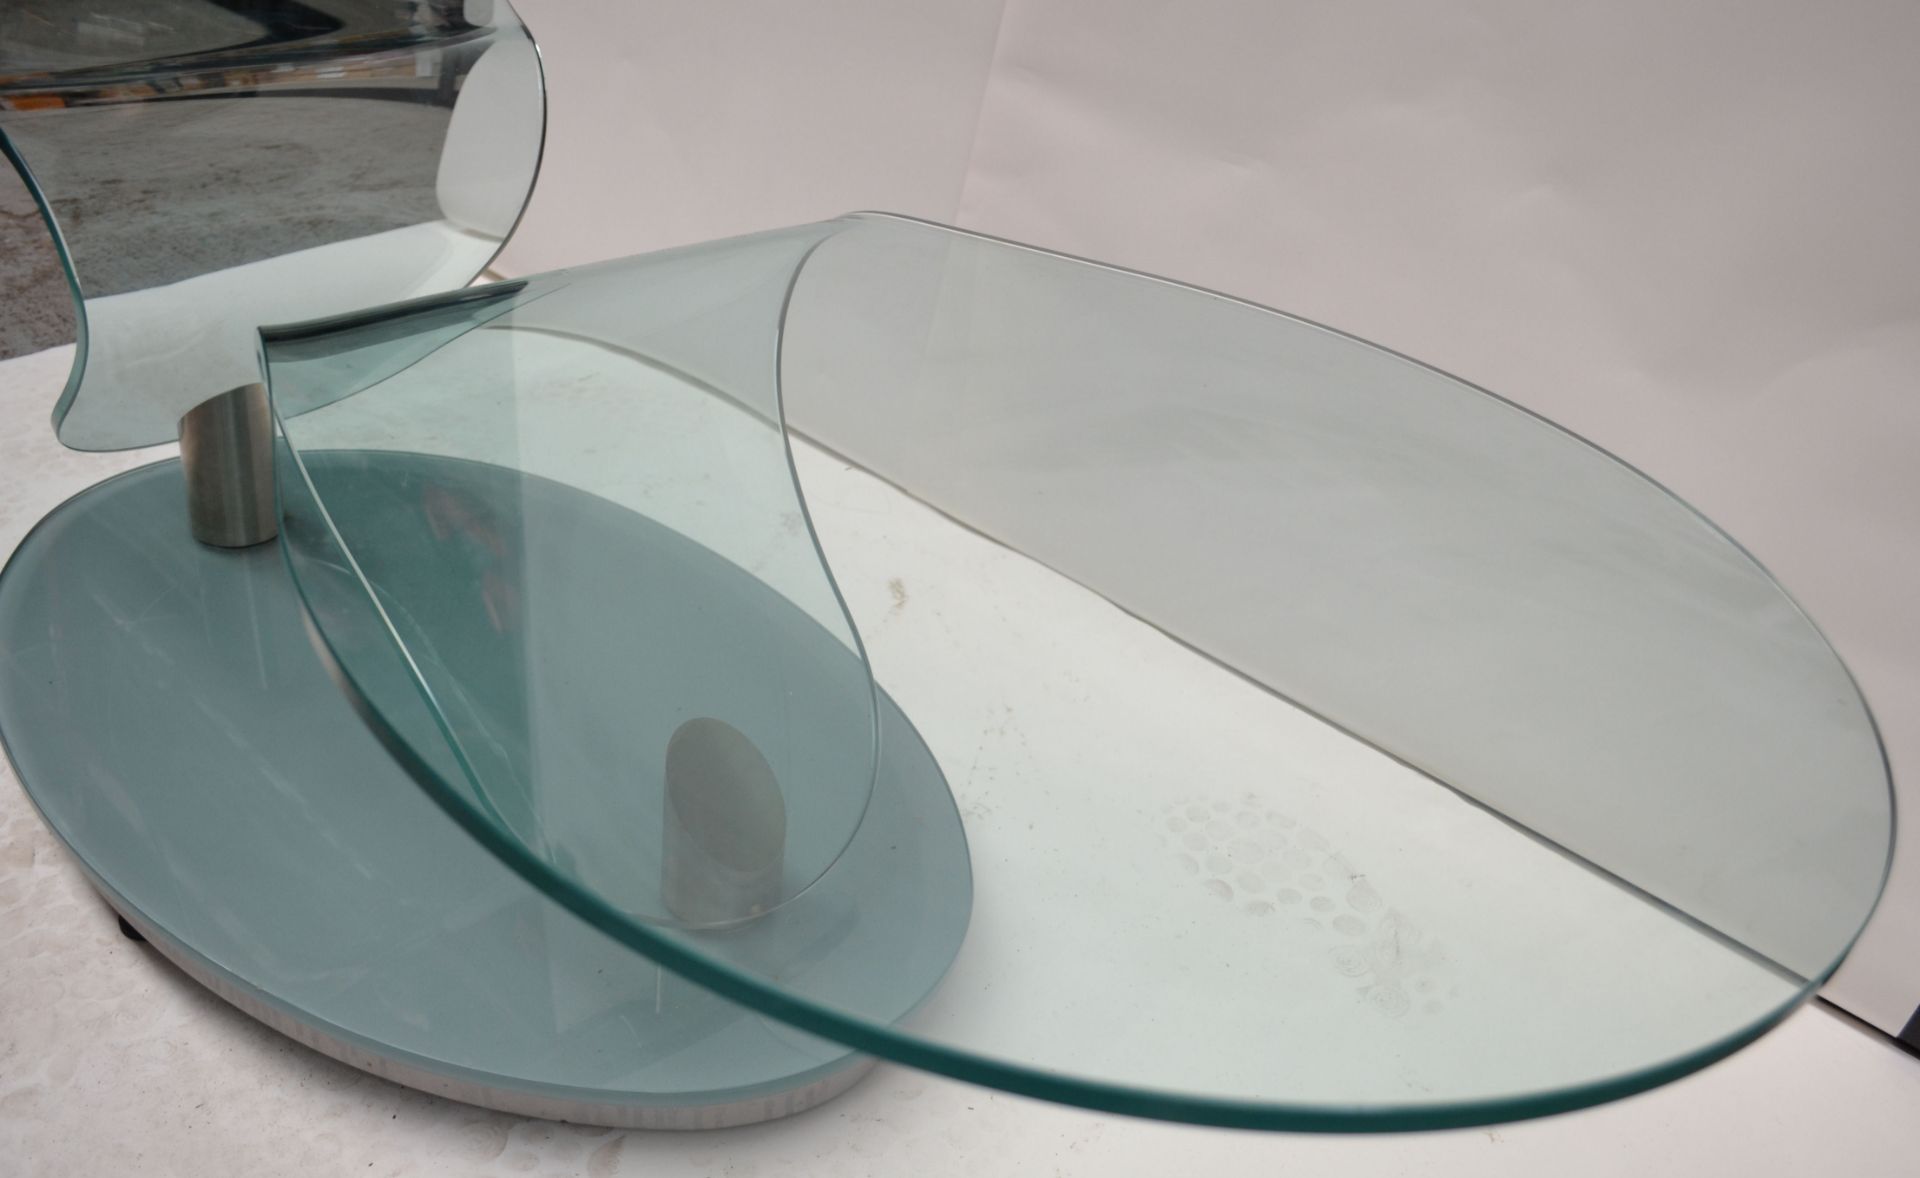 1 x Contemporary Swivelling Glass Coffee Table - AE007 - CL007 - Location: Altrincham WA14 - Image 8 of 13